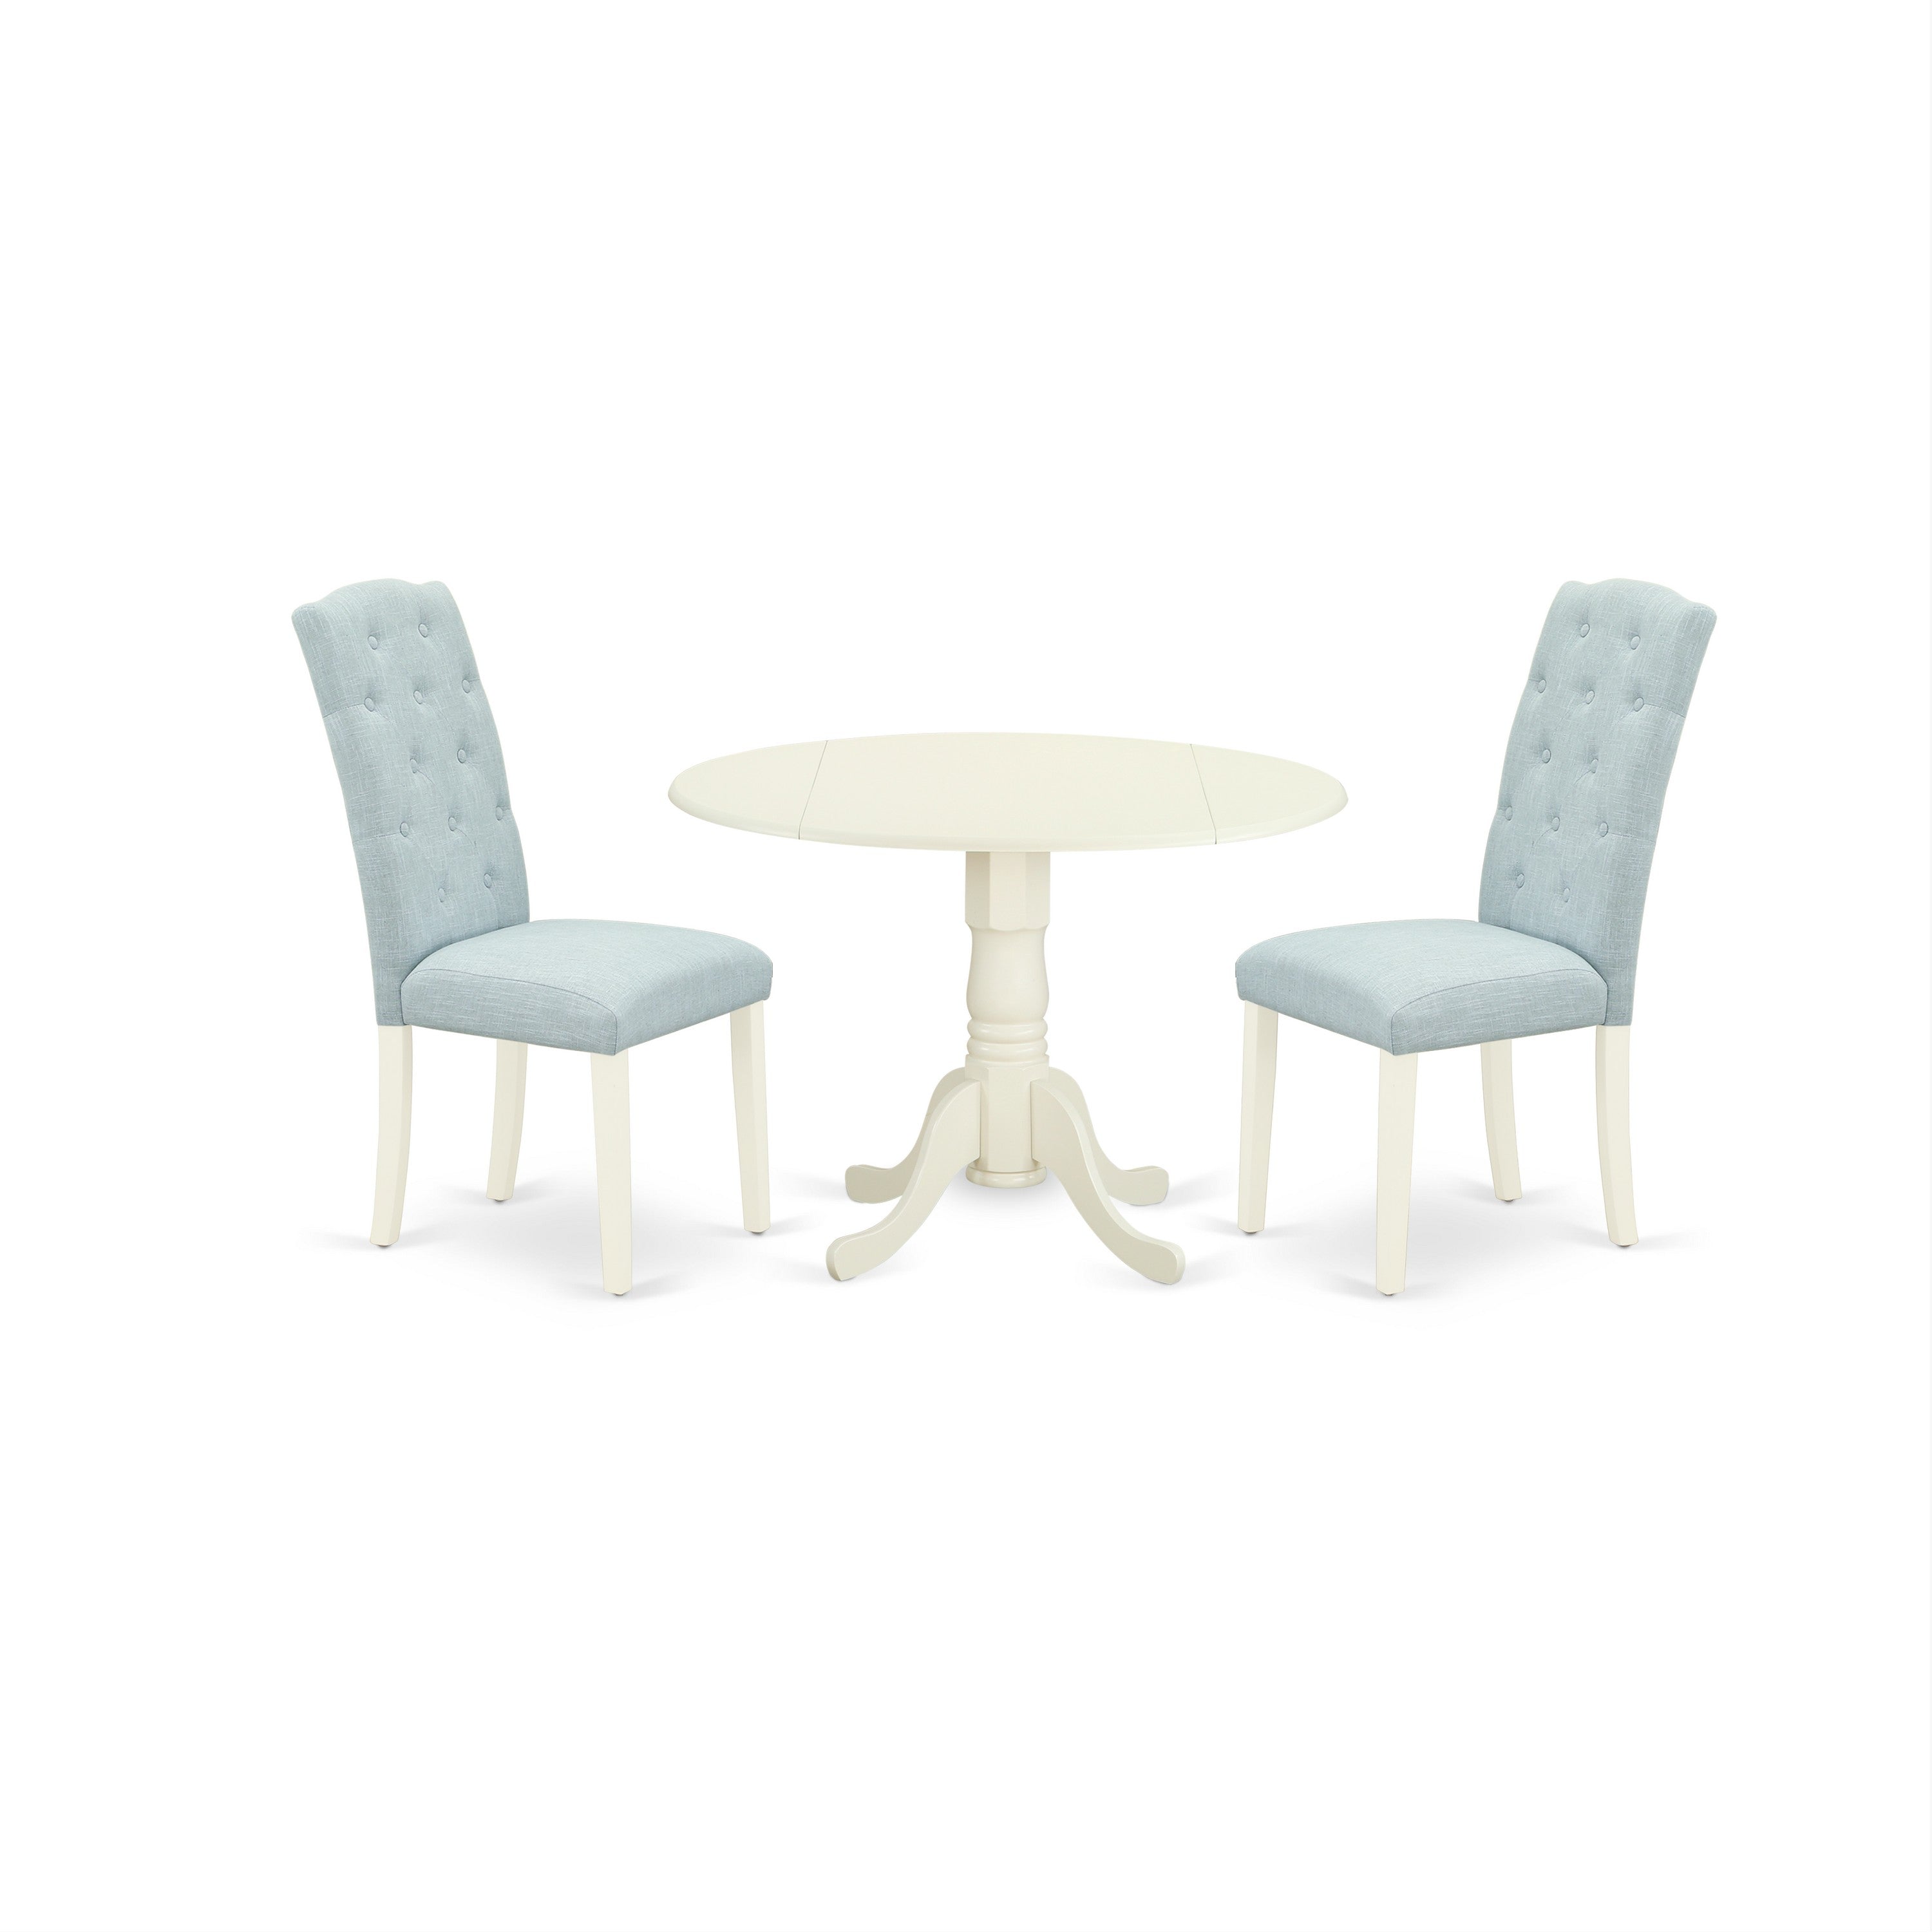 3Pc Dropleaf White Round Kitchen Dining Table and Two Parson Chairs in Baby Blue